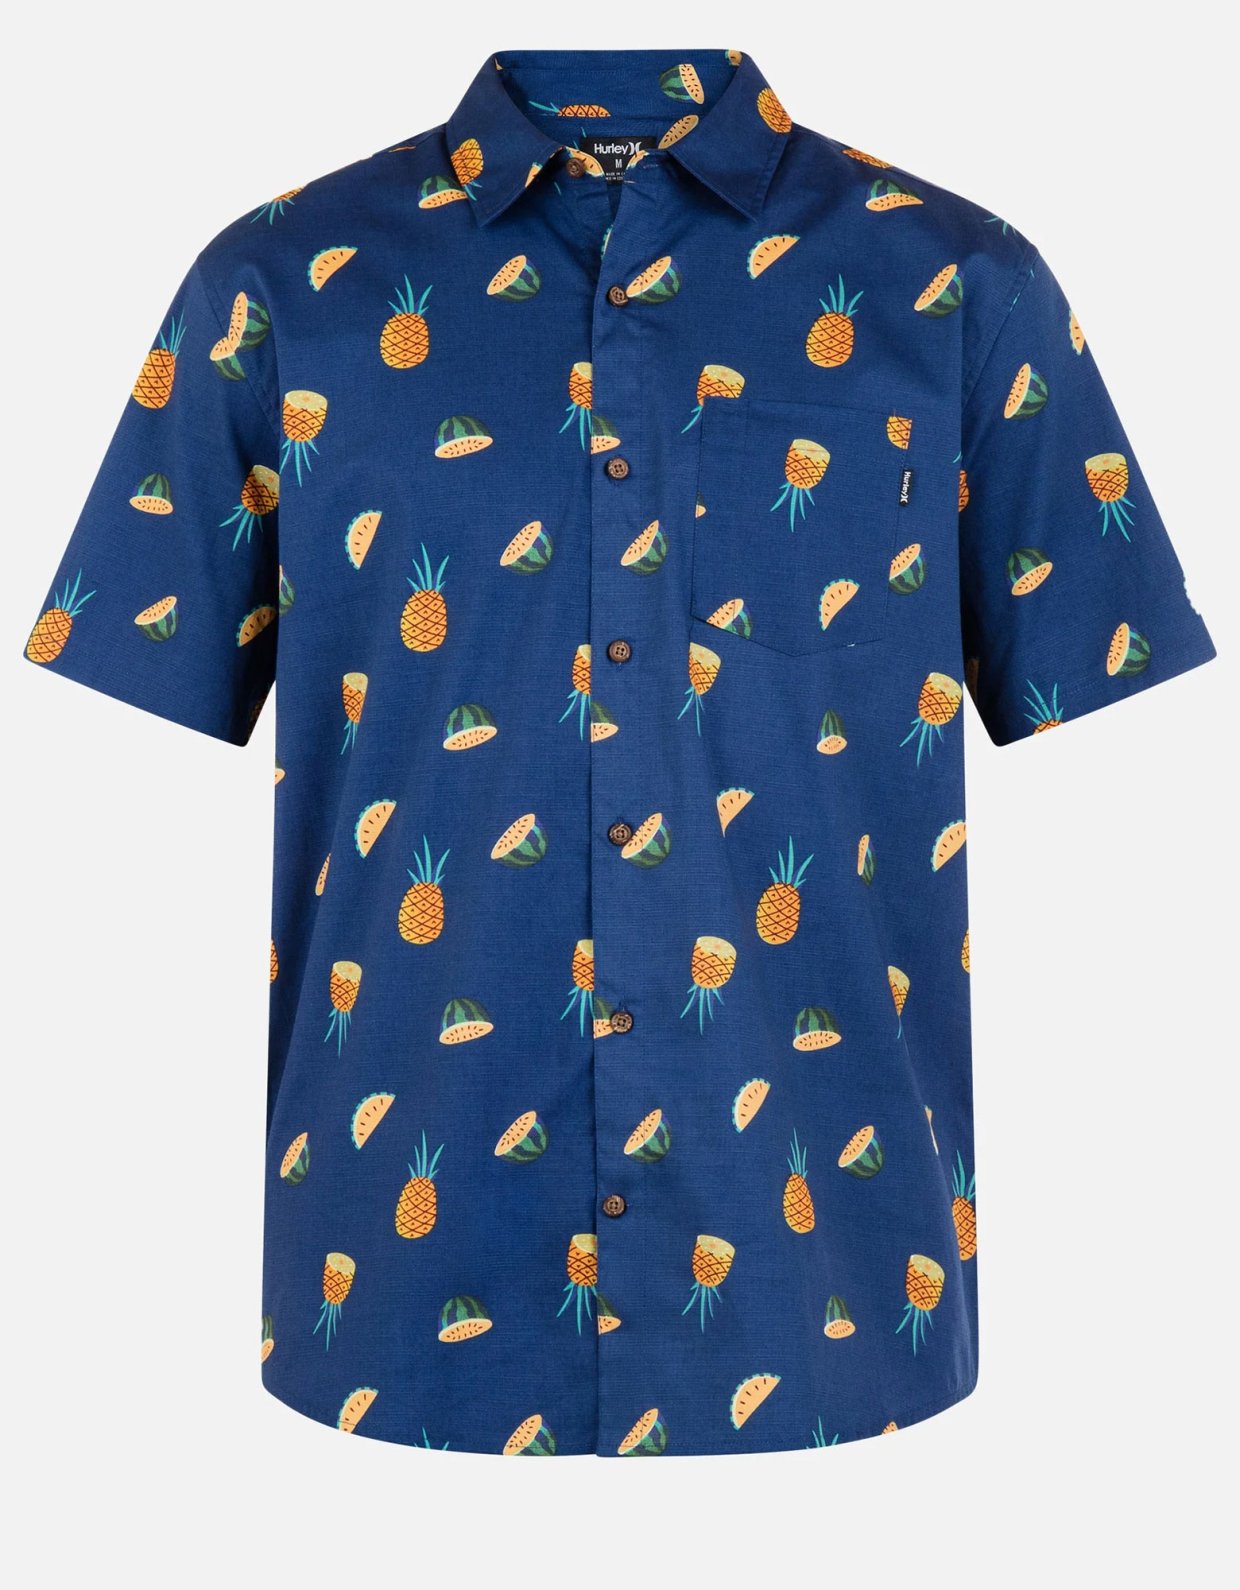 Hurley One and only shirt pinapple